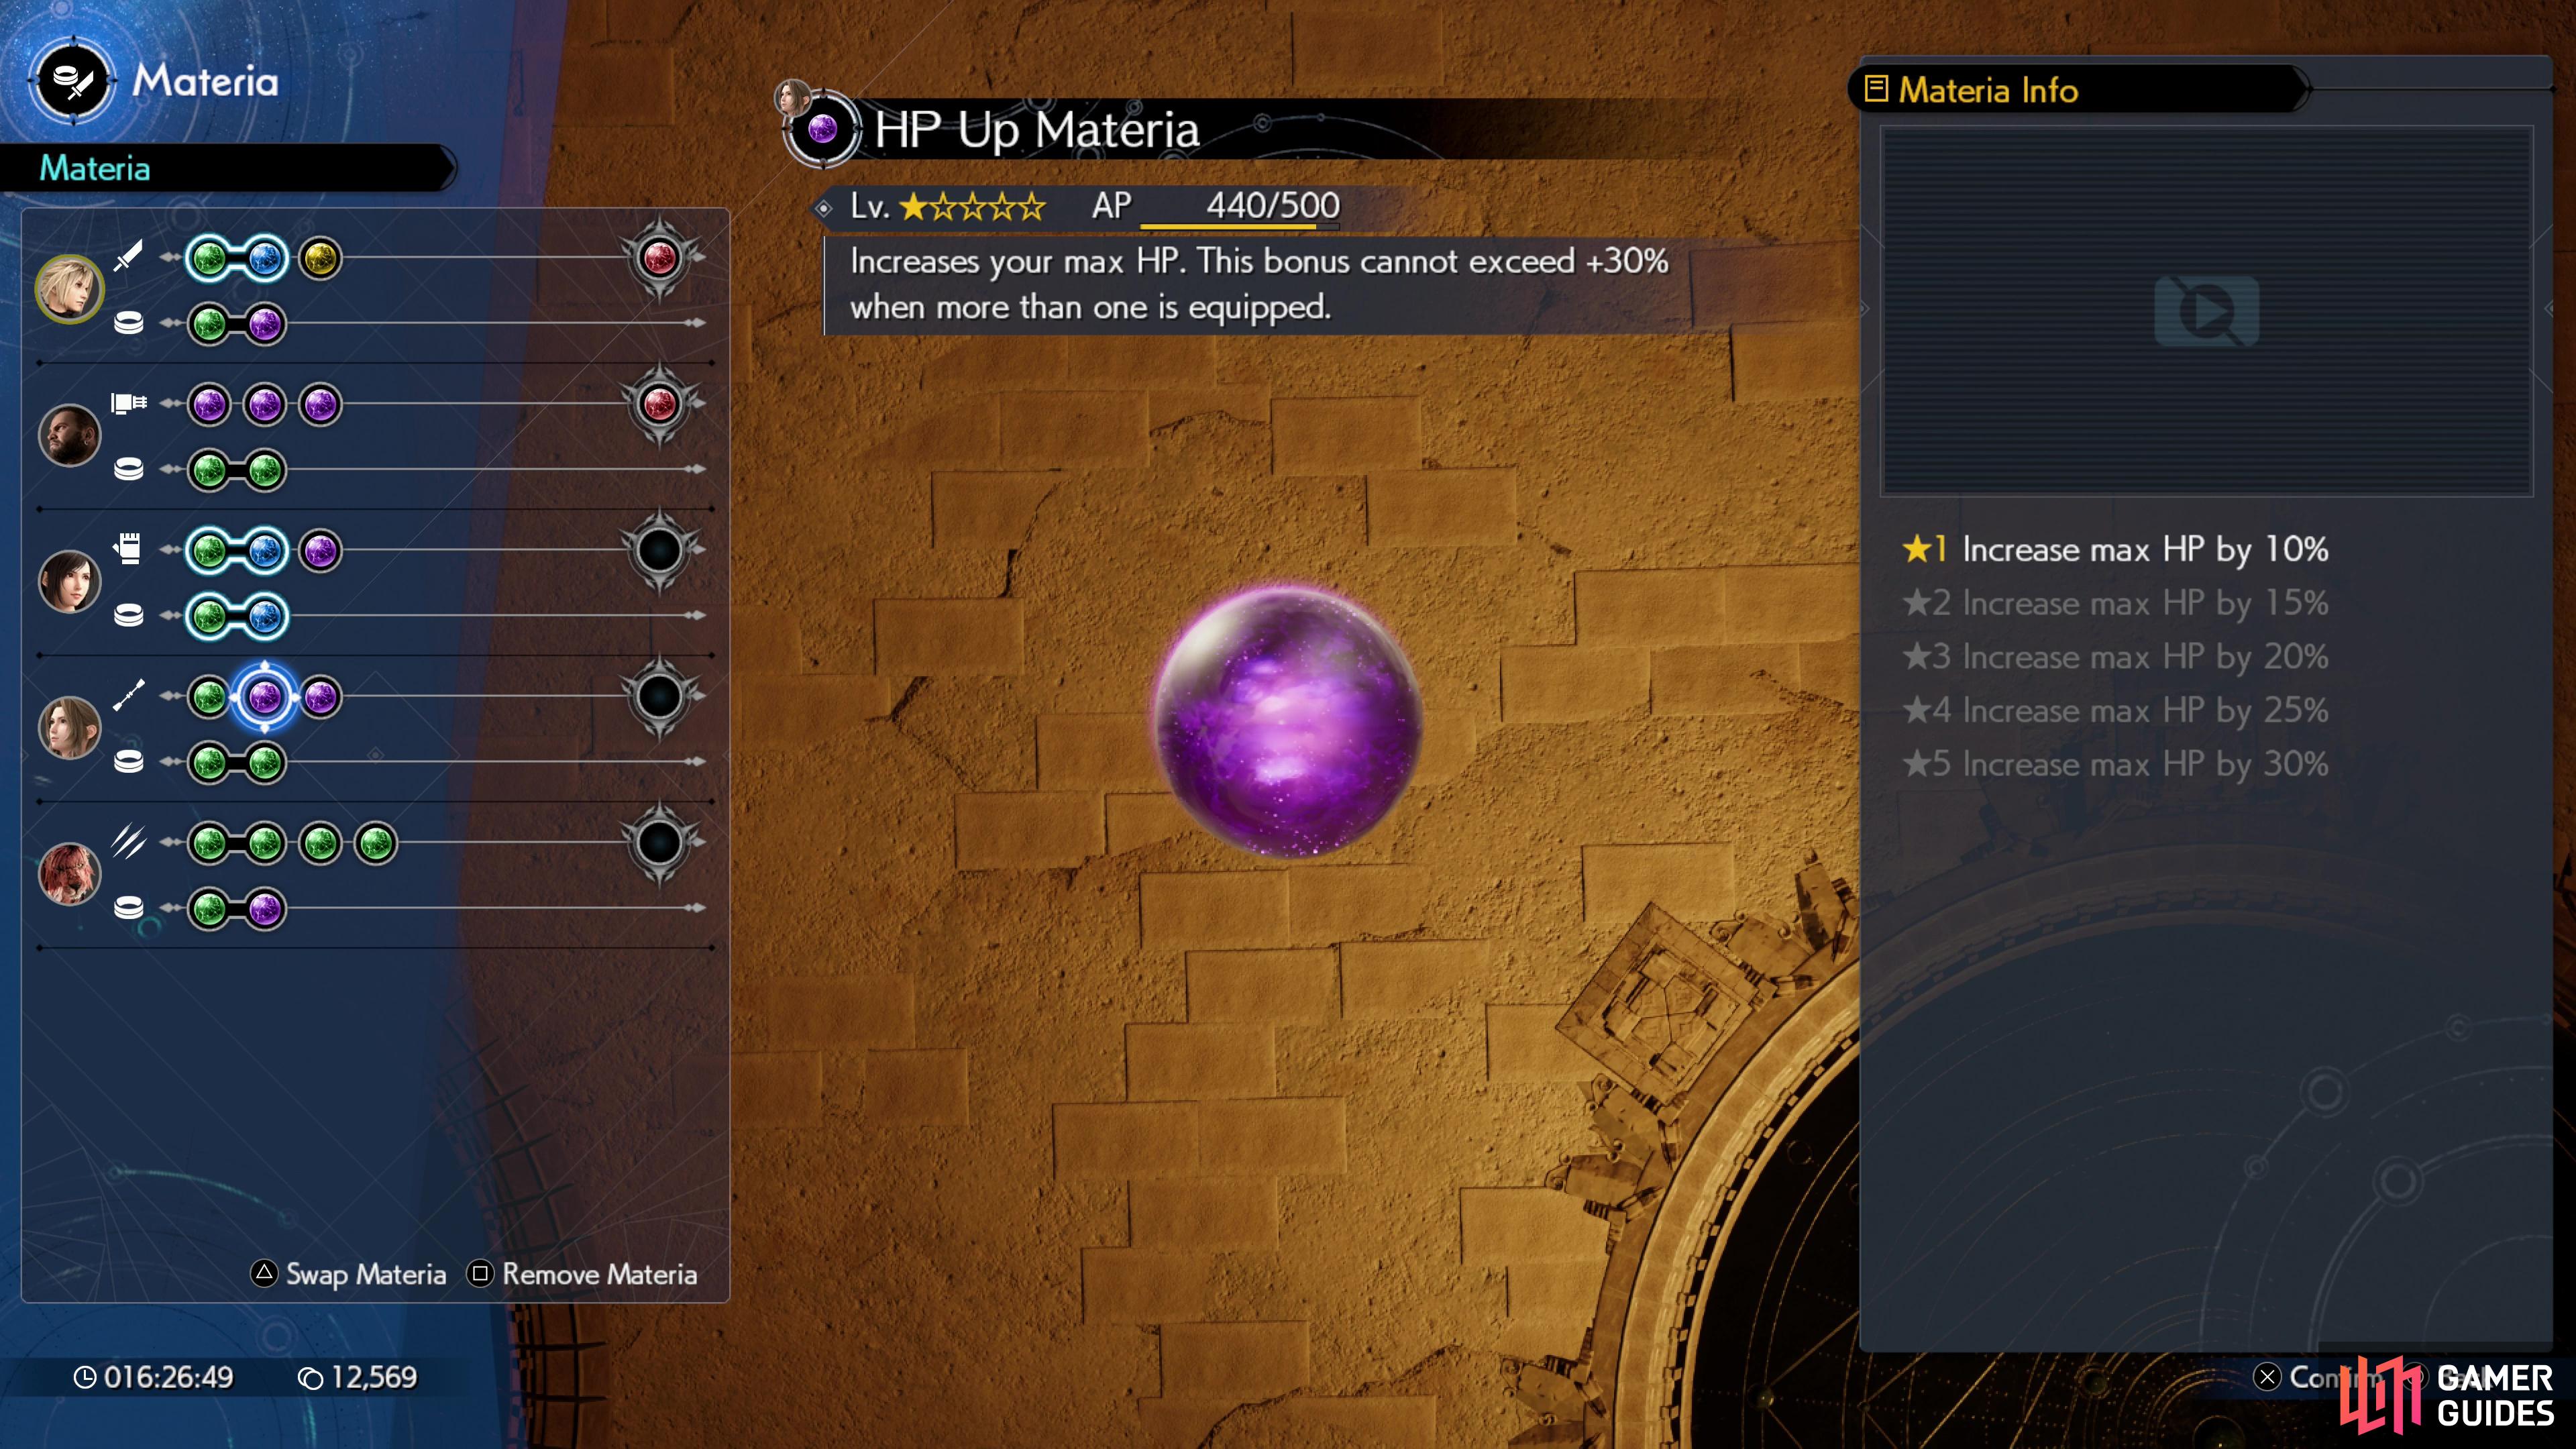 All equipped materia gains AP, even for backline characters. Optimize them for materia growth and ensure their materia sockets are always filled.